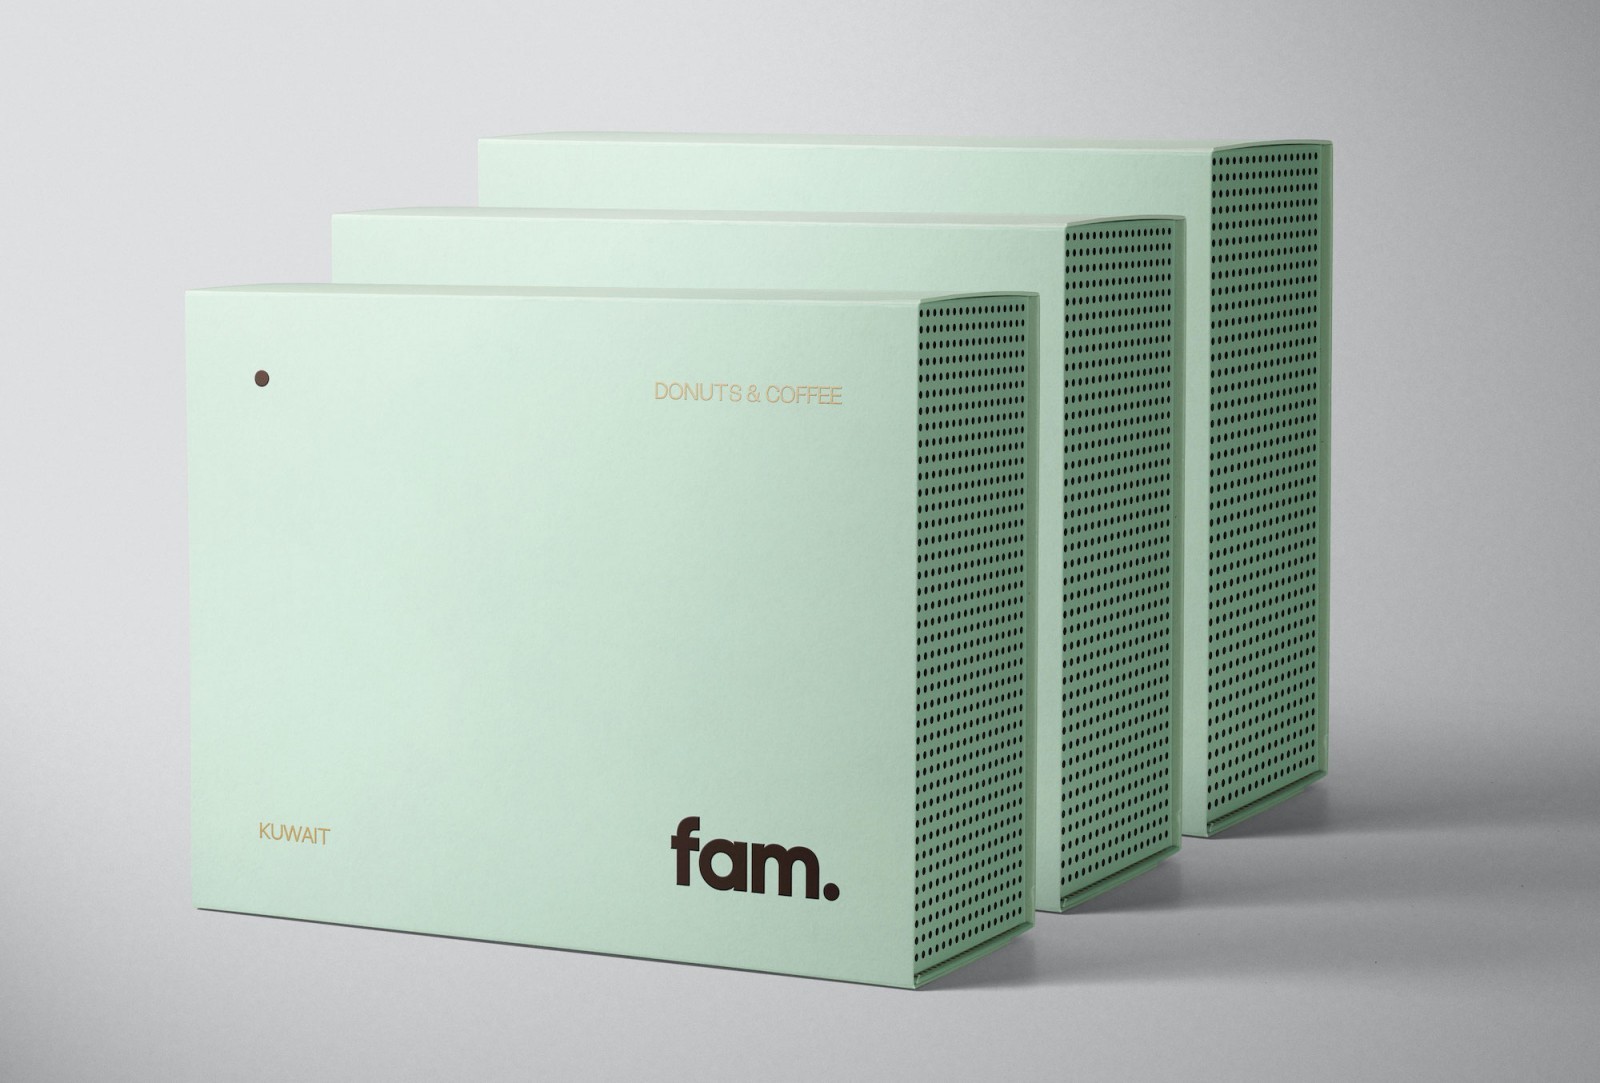 Fagerström Create Visual Identity and Packaging for Fam – A Premium Donut Brand From Kuwait